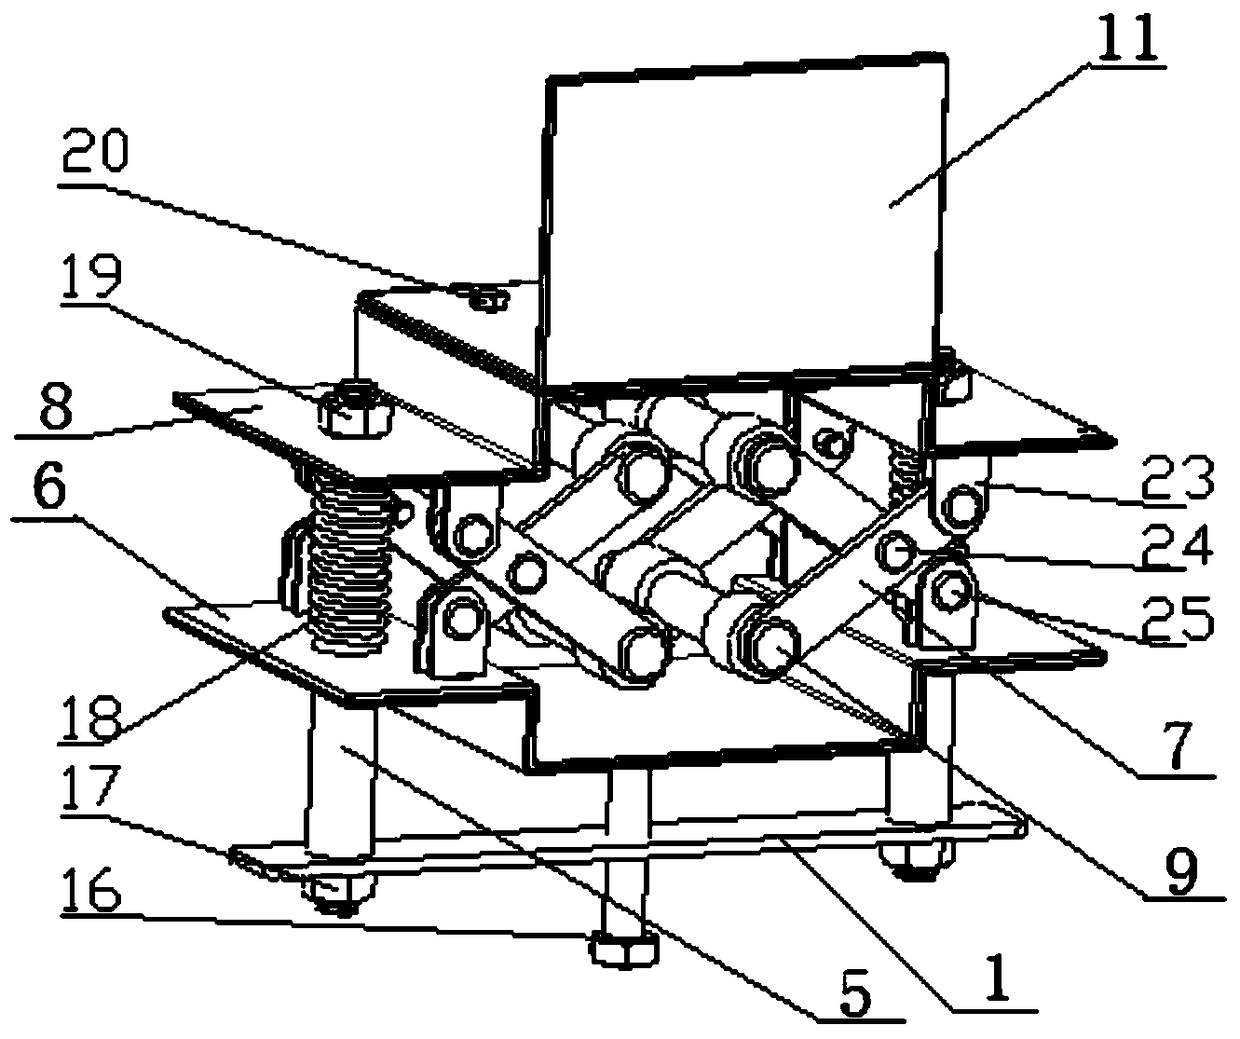 A large-section wire stripper